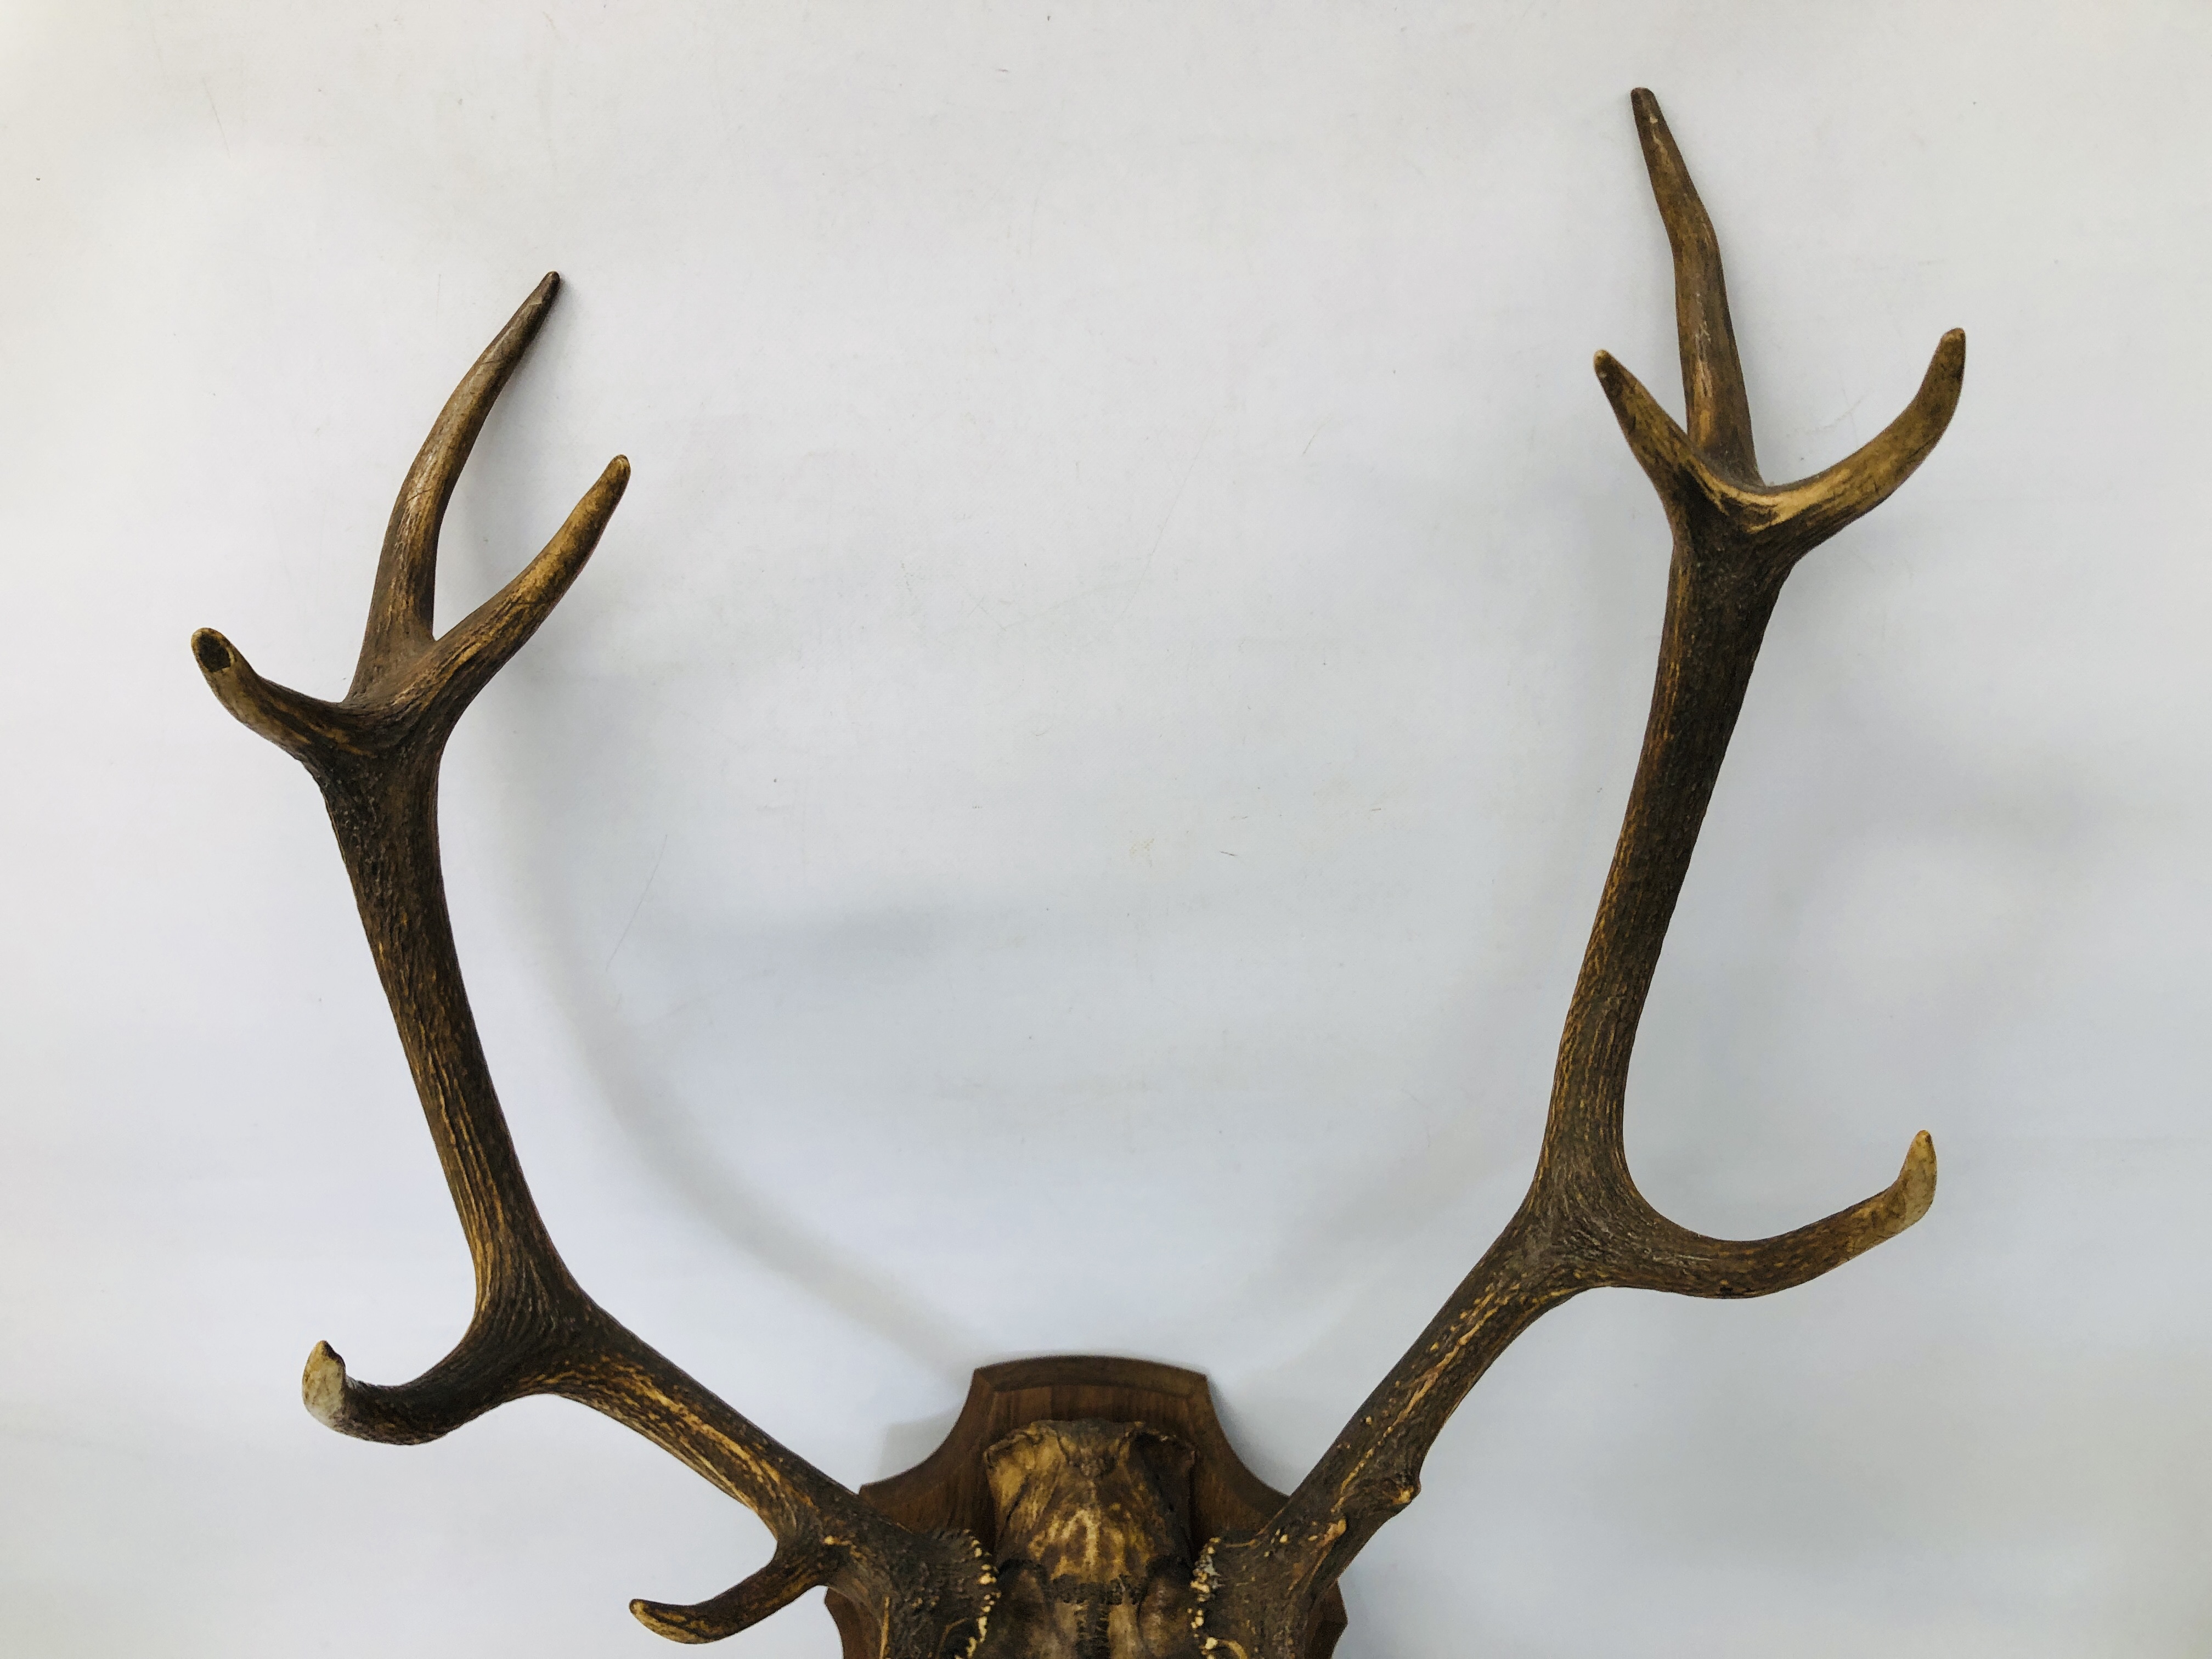 AN ELEVEN POINT RED DEER ANTLERS MOUNTED ON OAK SHIELD WALL PLAQUE. - Image 2 of 3